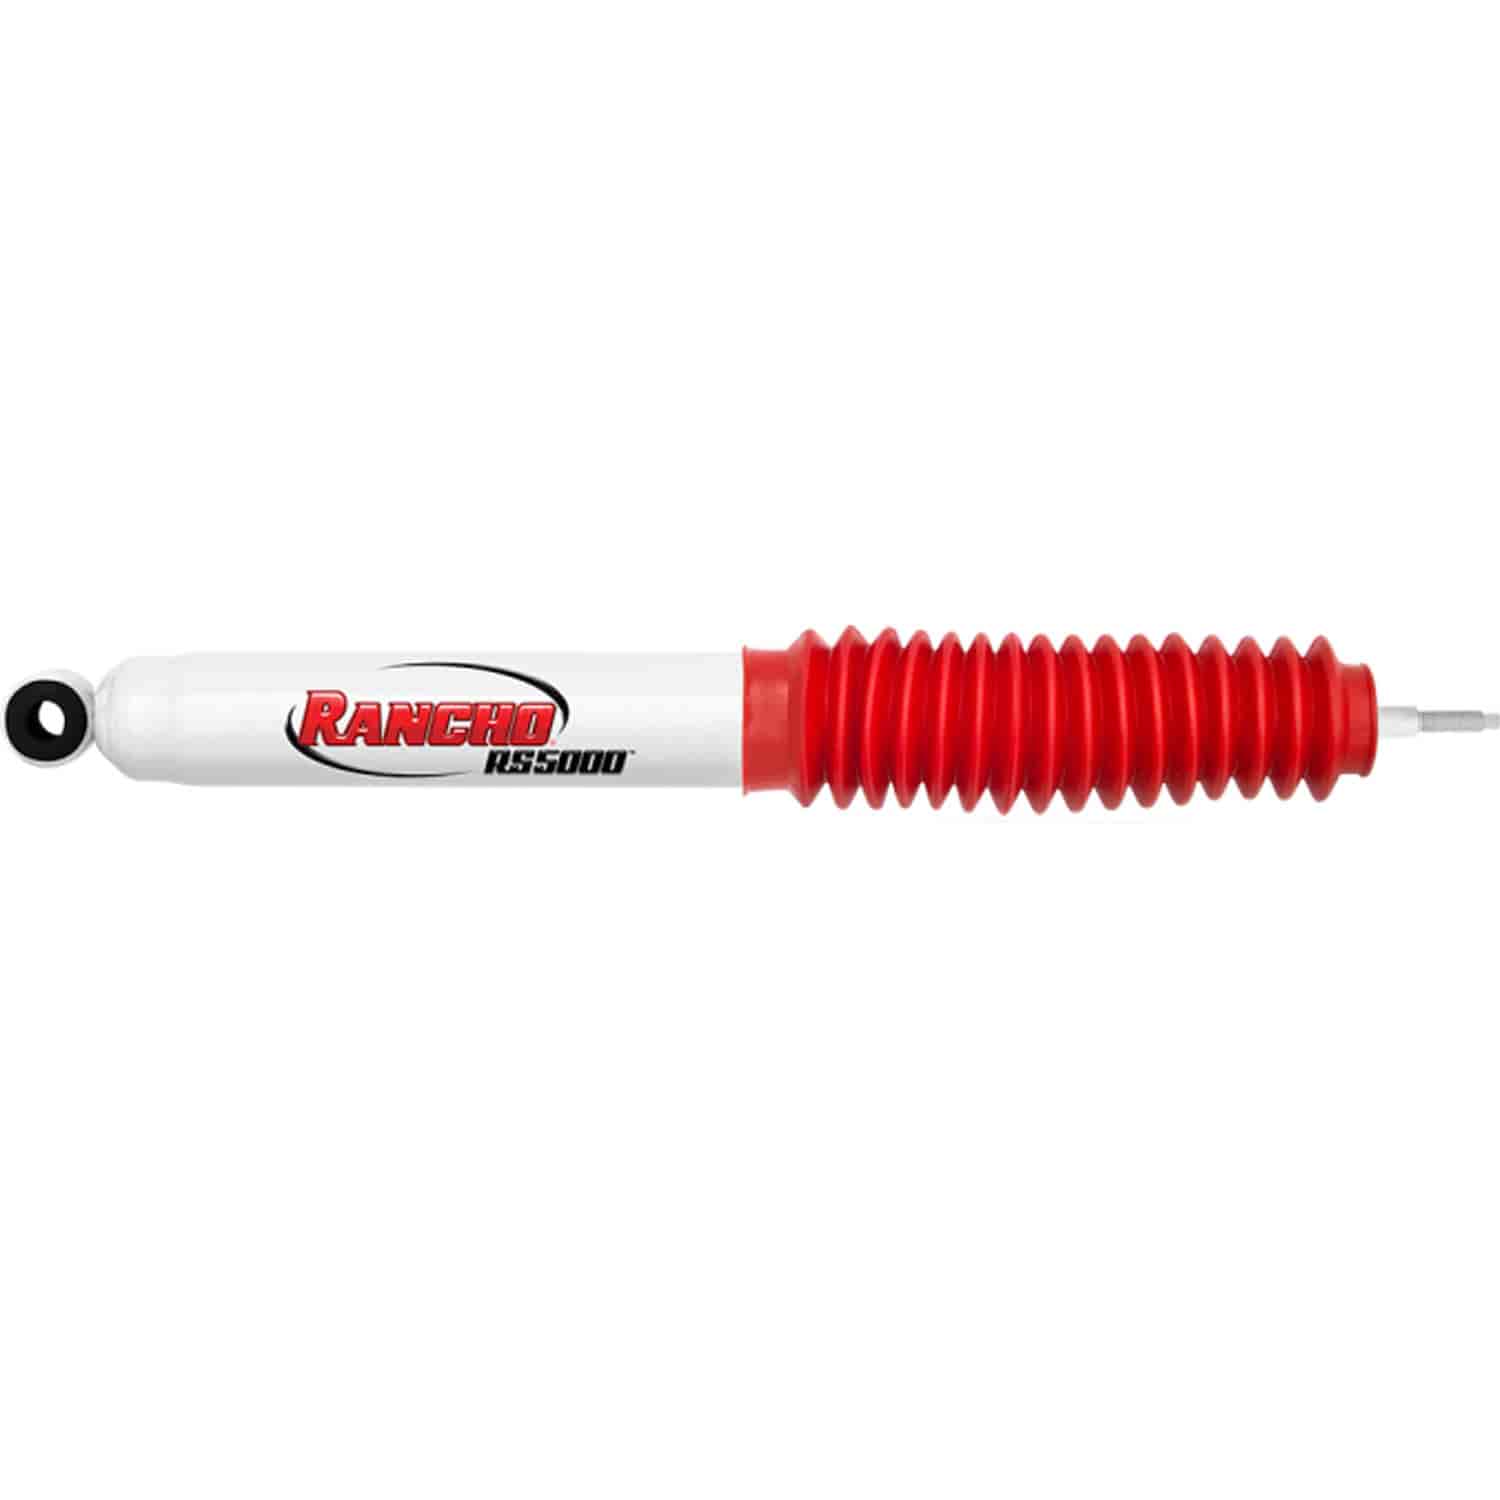 RS5000 Rear Shock Absorber Fits Toyota Land Cruiser and Lexus LX450/LX470